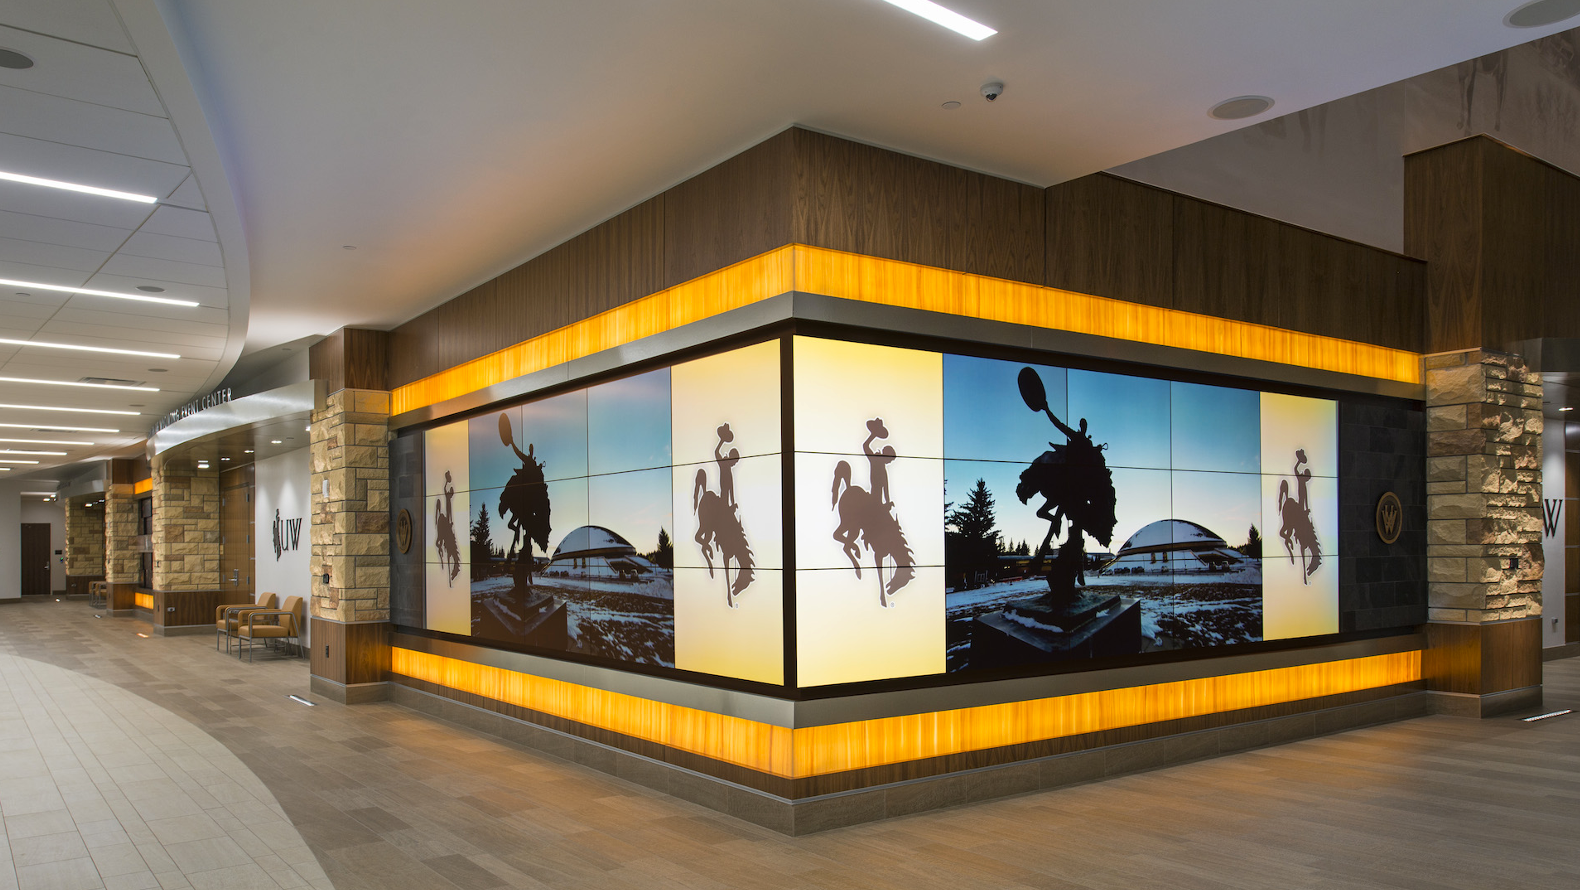 large video wall inside a mall showing a cowboy